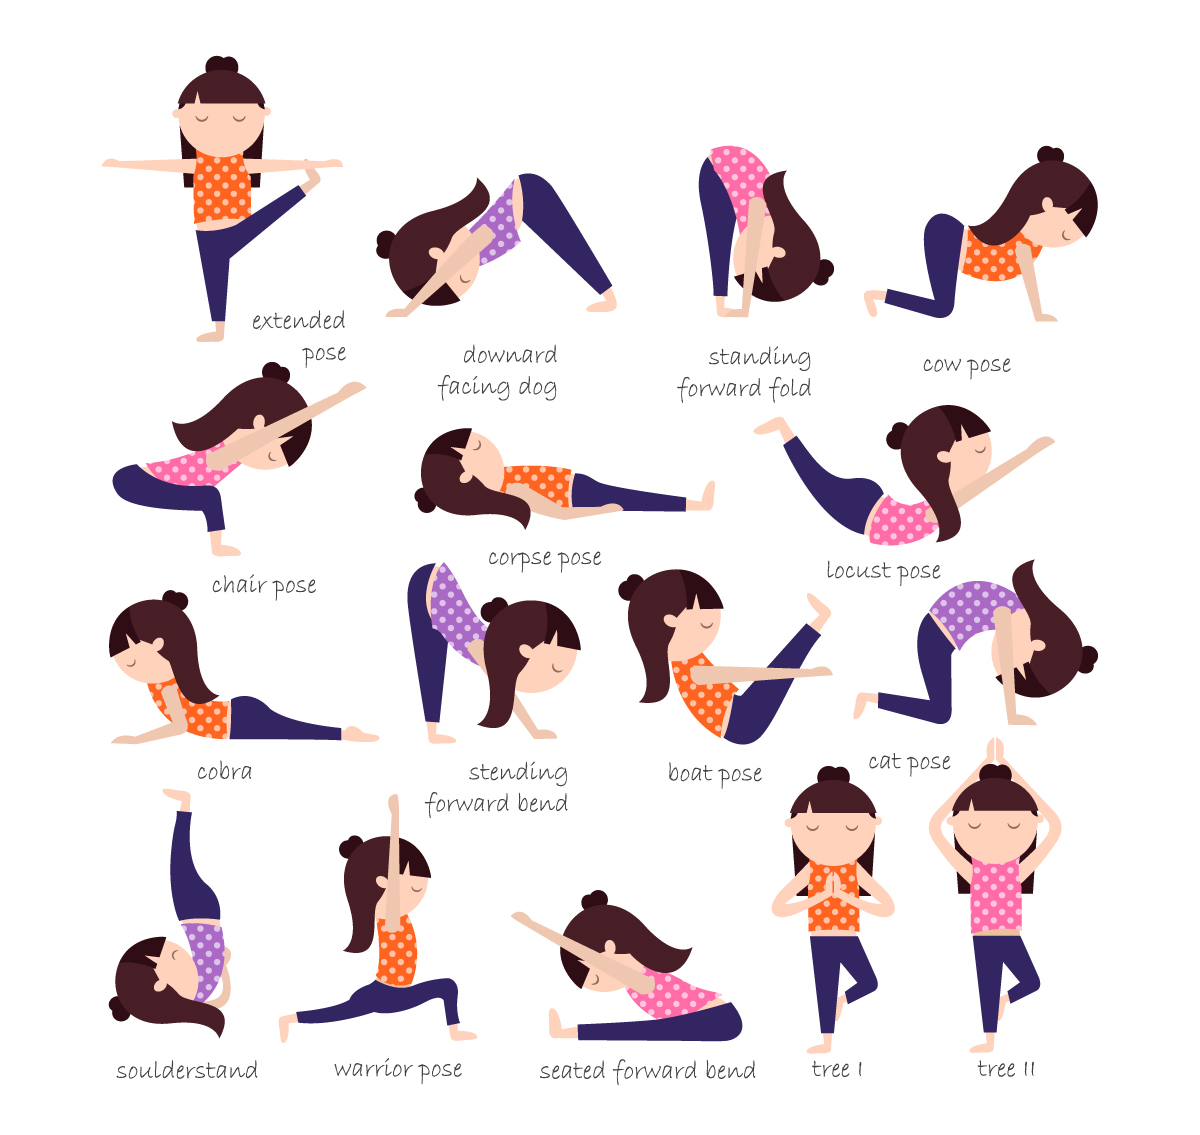 All Standing Yoga Poses 5 yoga poses for people who sit all day, so your body gets the